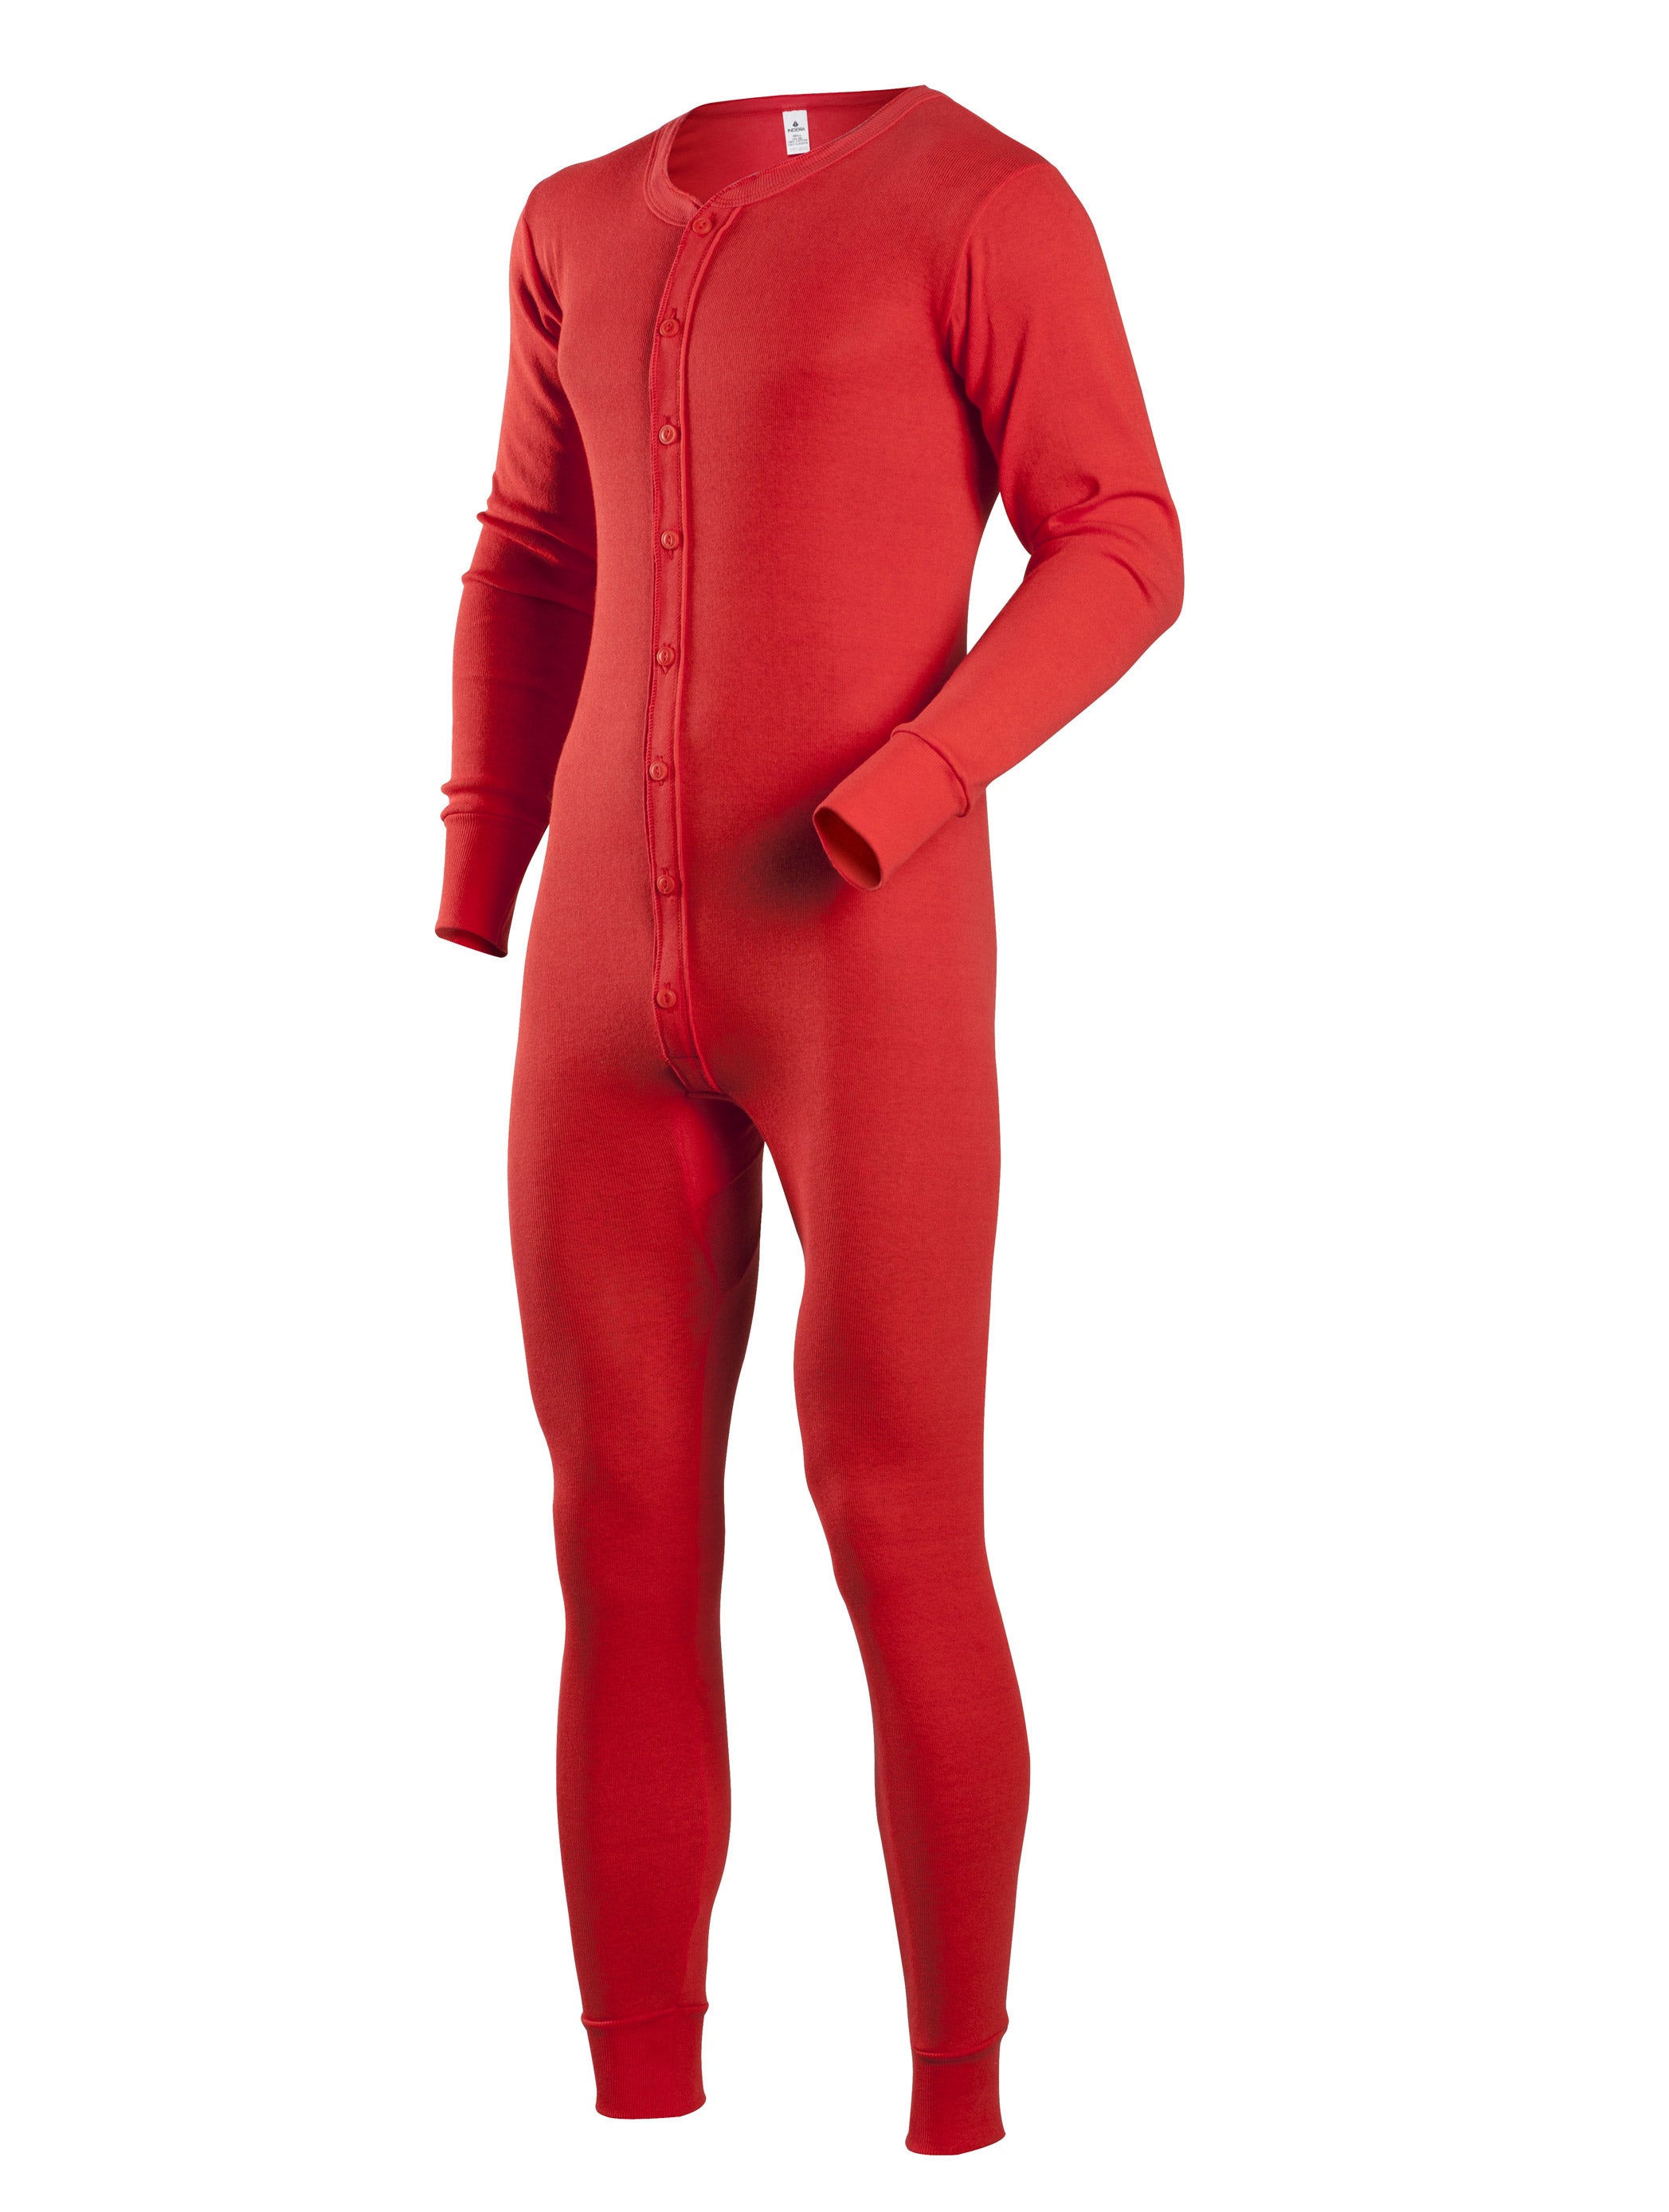 Coldmast Union Suits in Red - 865-R - Regular Sizes